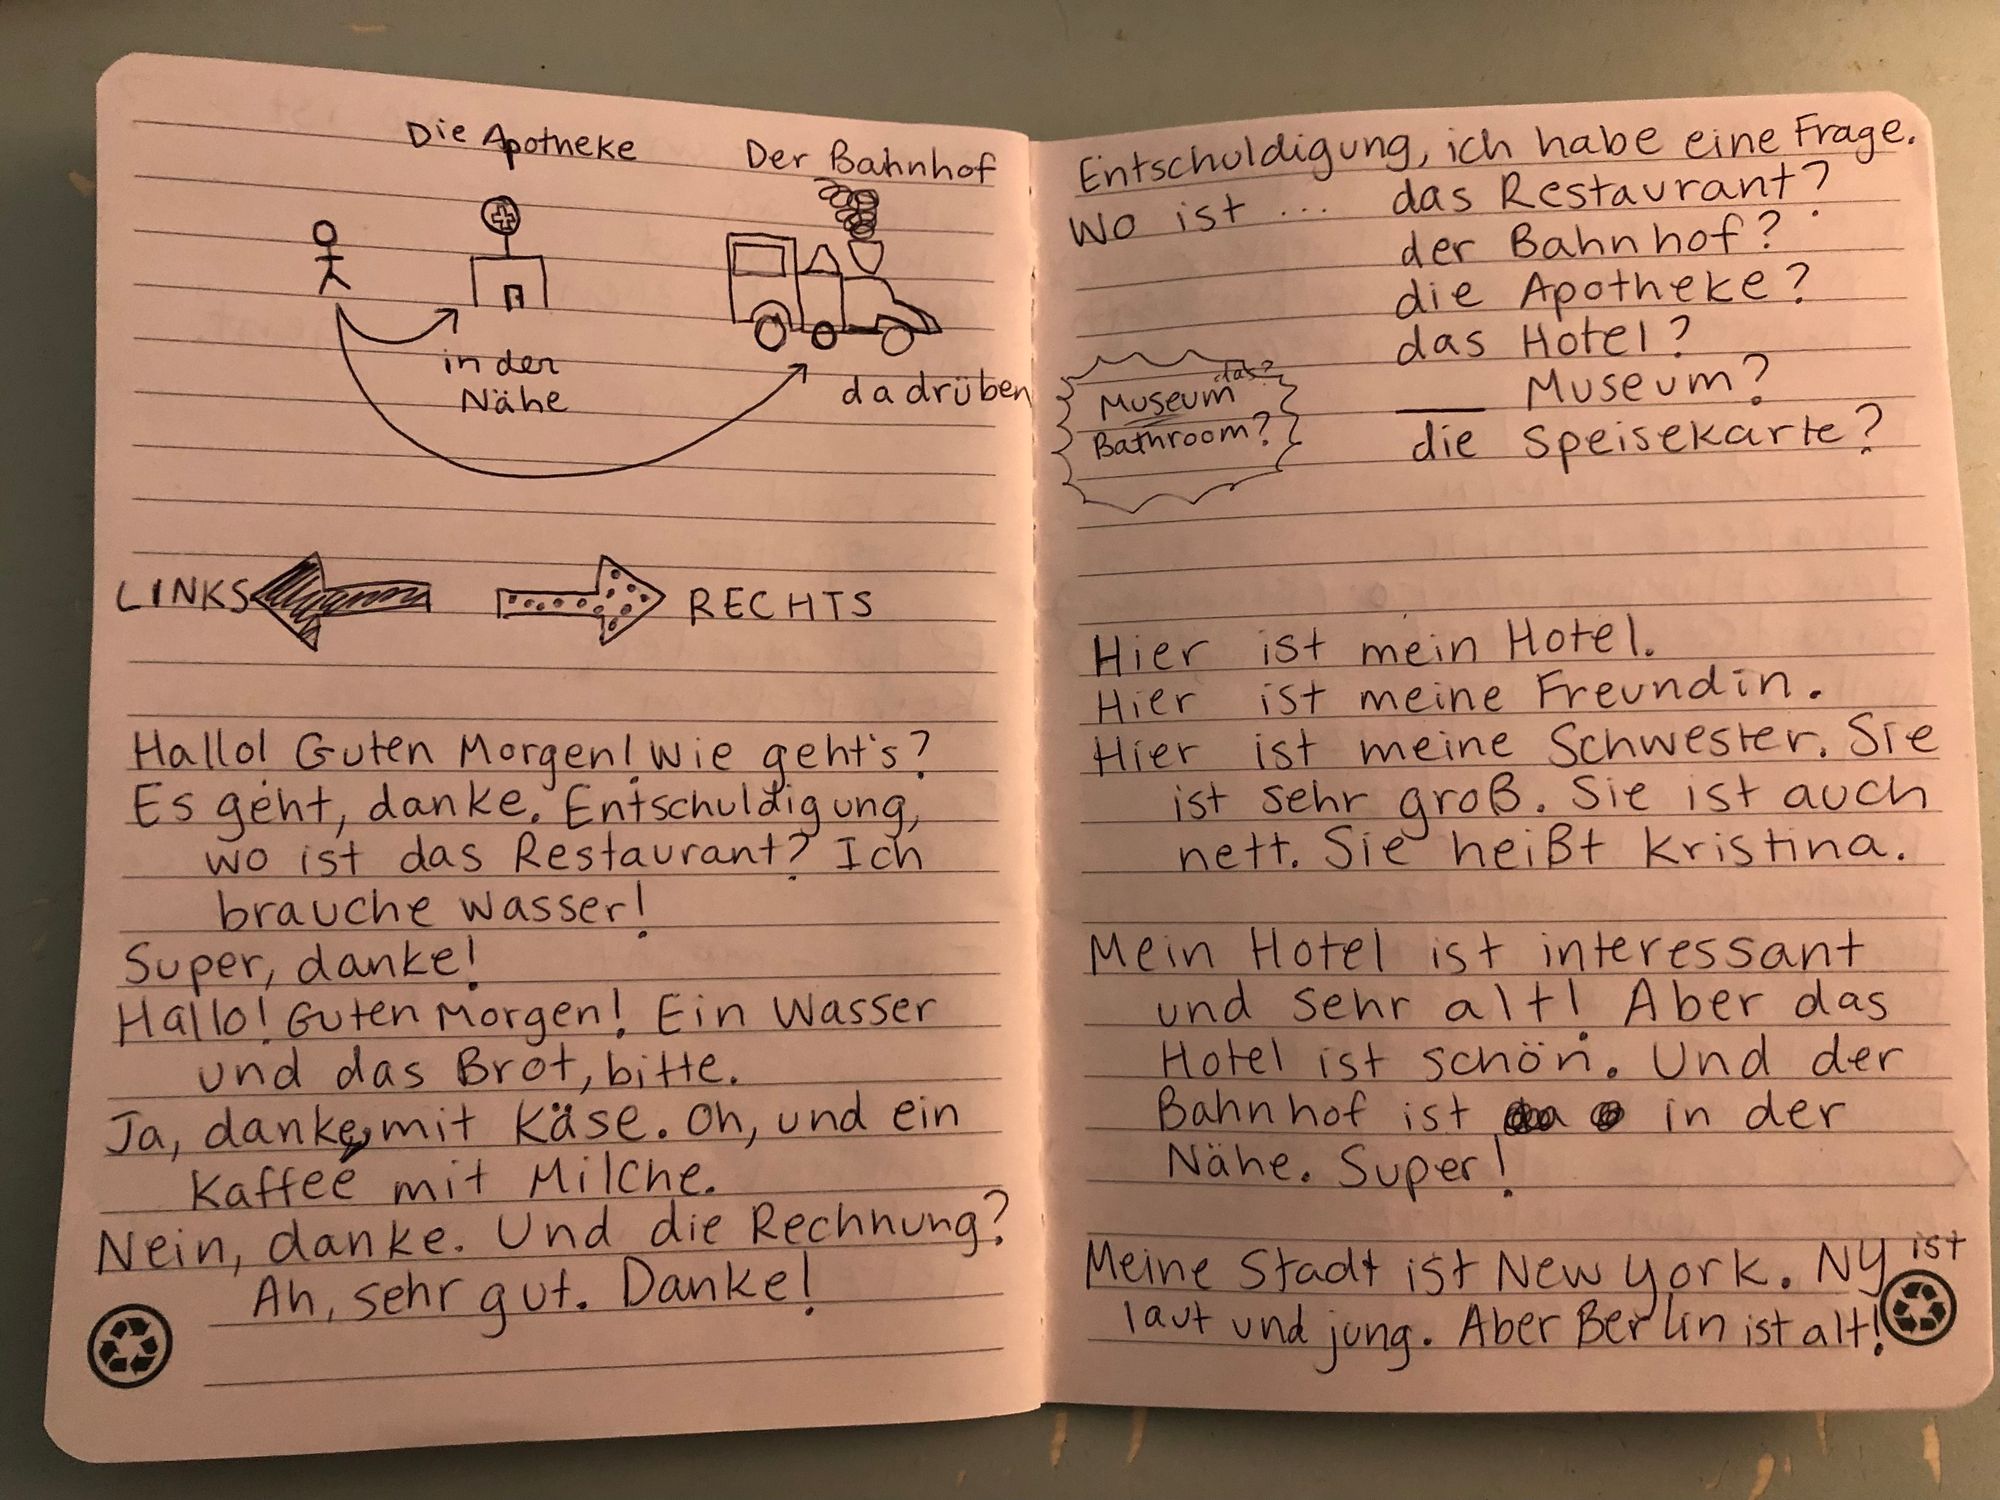 Photograph of two more pages of an open notebook. They show some drawings with labels in German, some paragraphs and mini dialogues in German, and lists of words and questions in German.